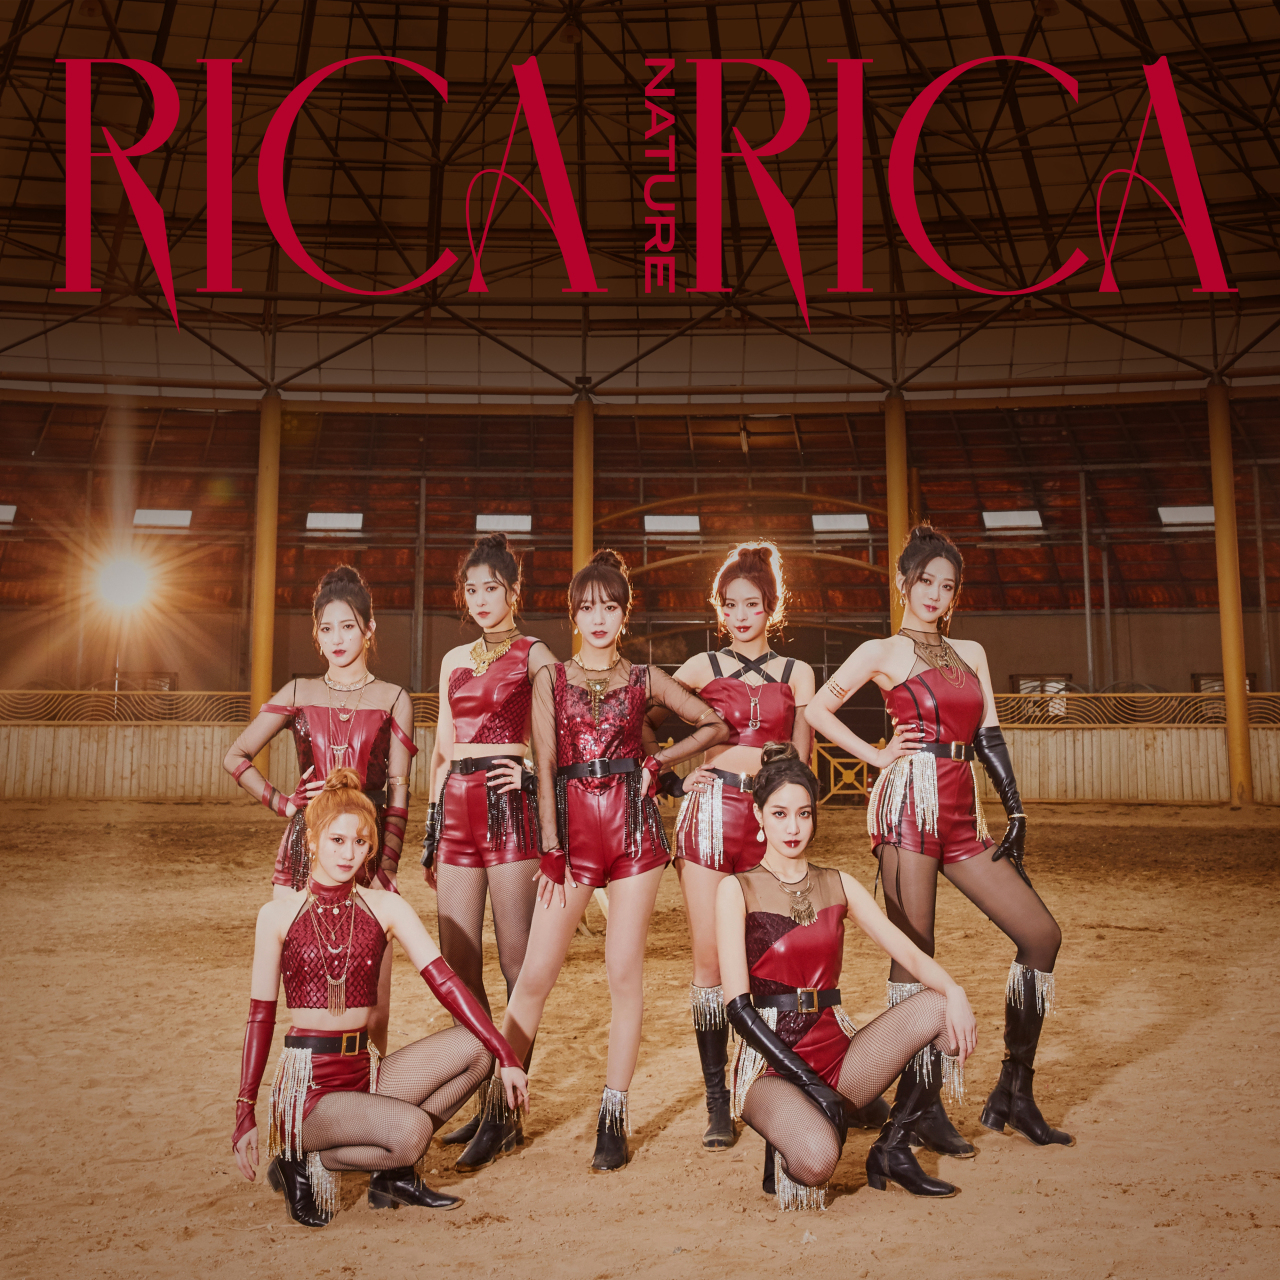 Cover image of Nature’s special single “Rica Rica” (n.CH Entertainment)